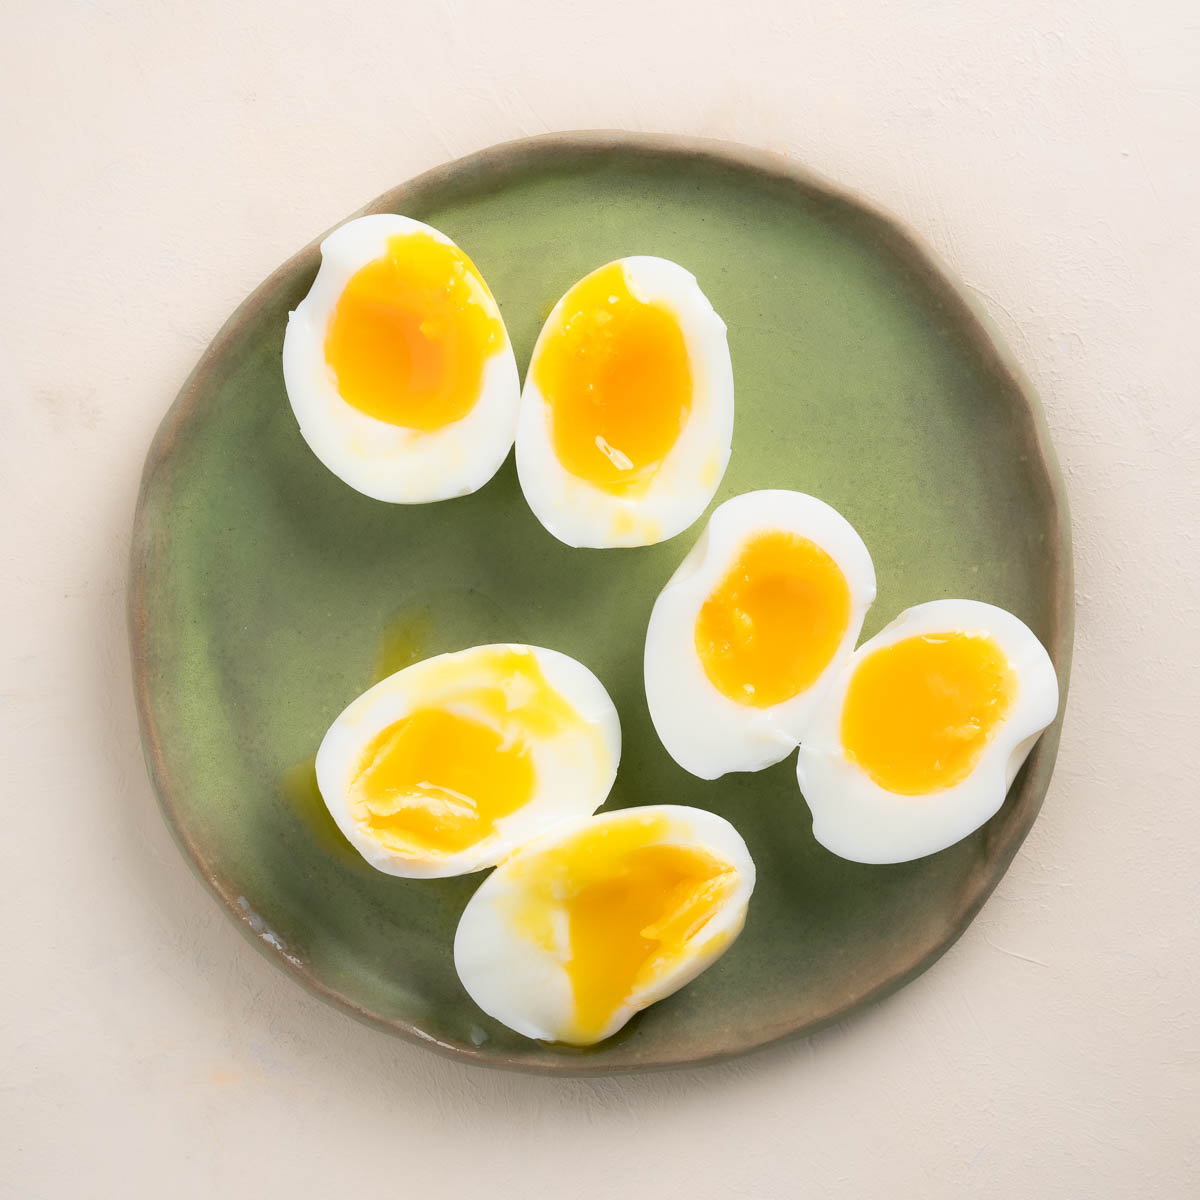 Three Air Fryer Soft Boiled Eggs sliced in half and displayed on on a sage green plate